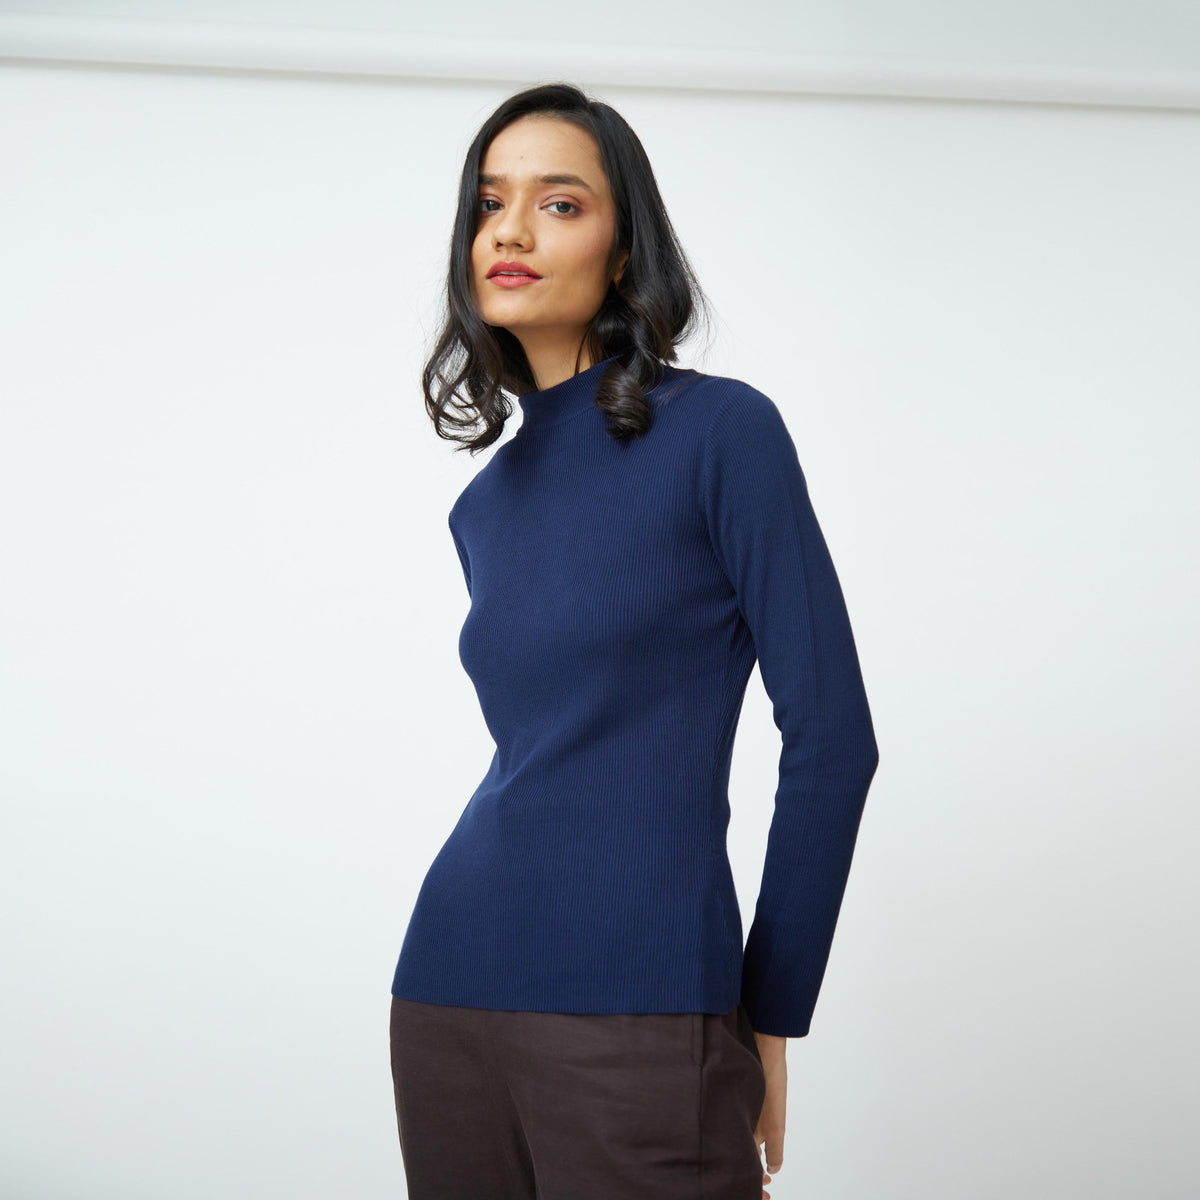 Saltpetre womens high neck mock turtle shirt in full sleeves - navy blue. Best for semi-formal and casual outdoor wear.